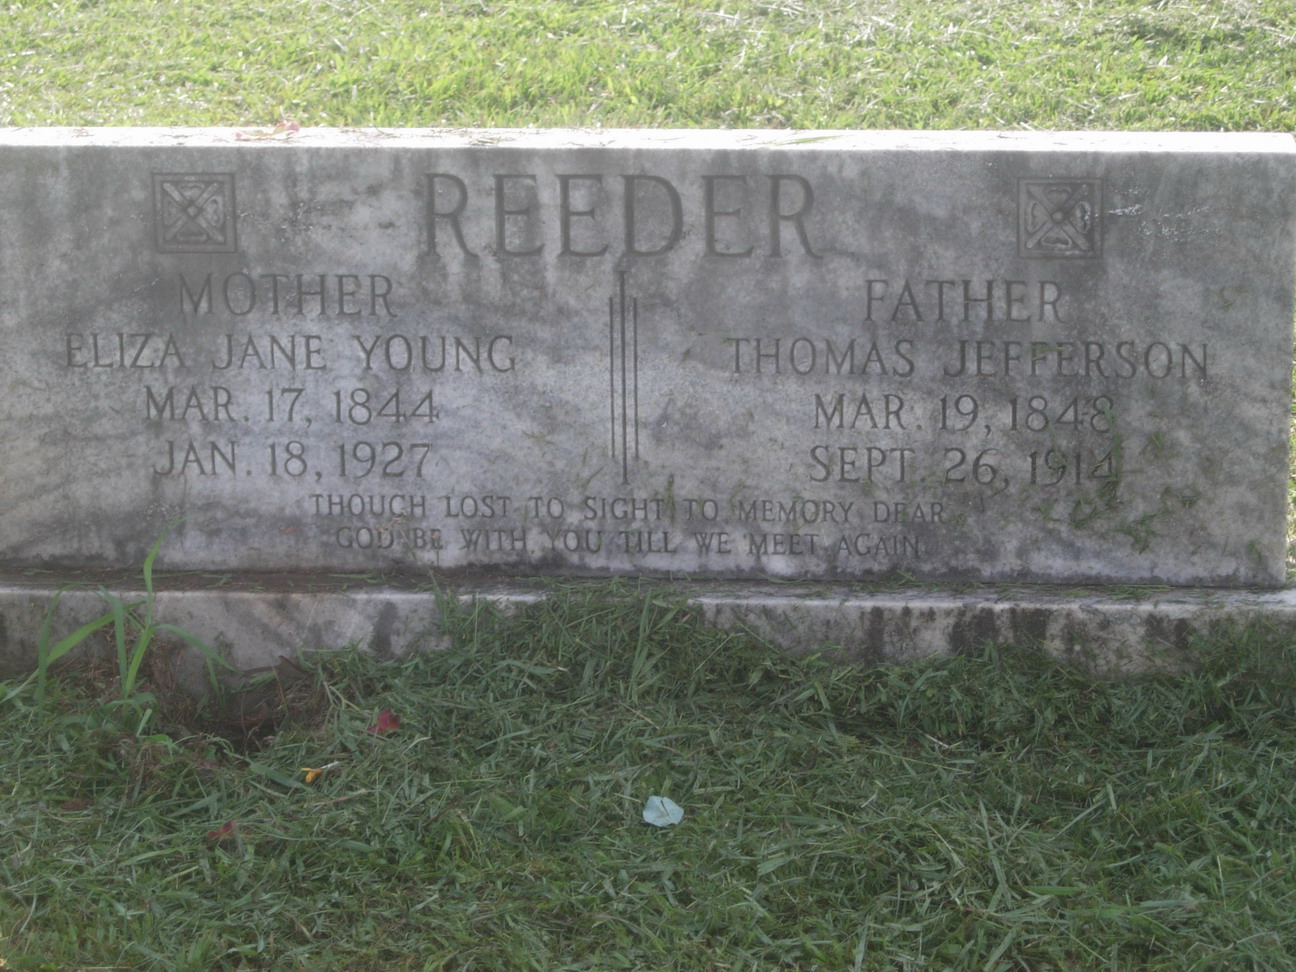 Thomas & Eliza Young Reeder Tombstone, Pontotoc County, Mississippi, Williams/ Gershom